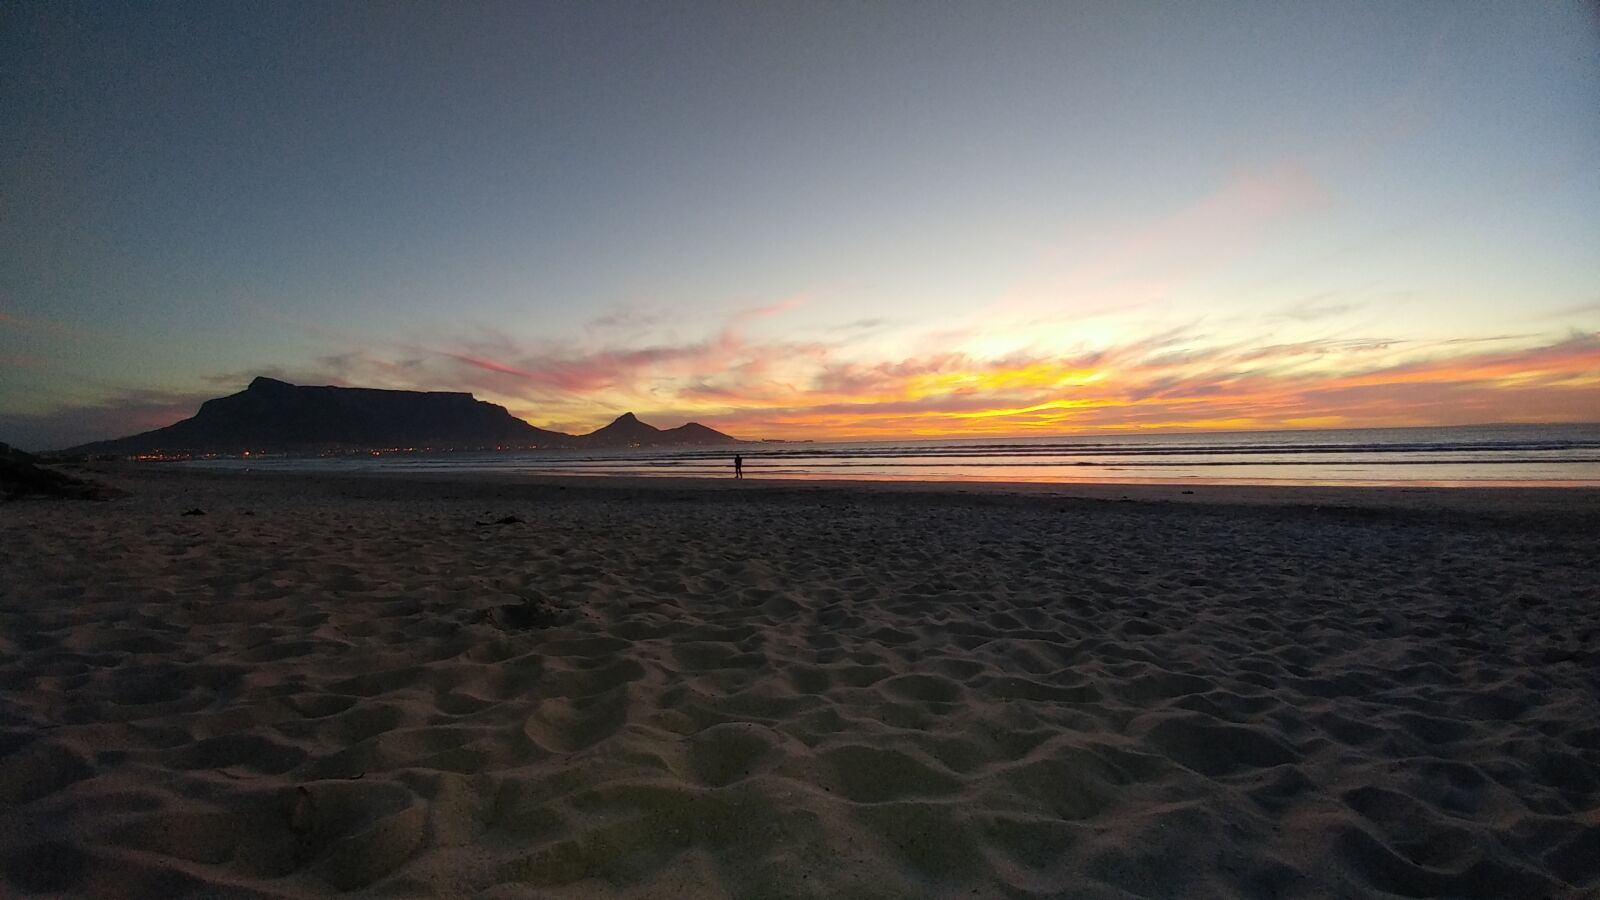 LG G5 SE sample photo. Cape town, table mountain photography